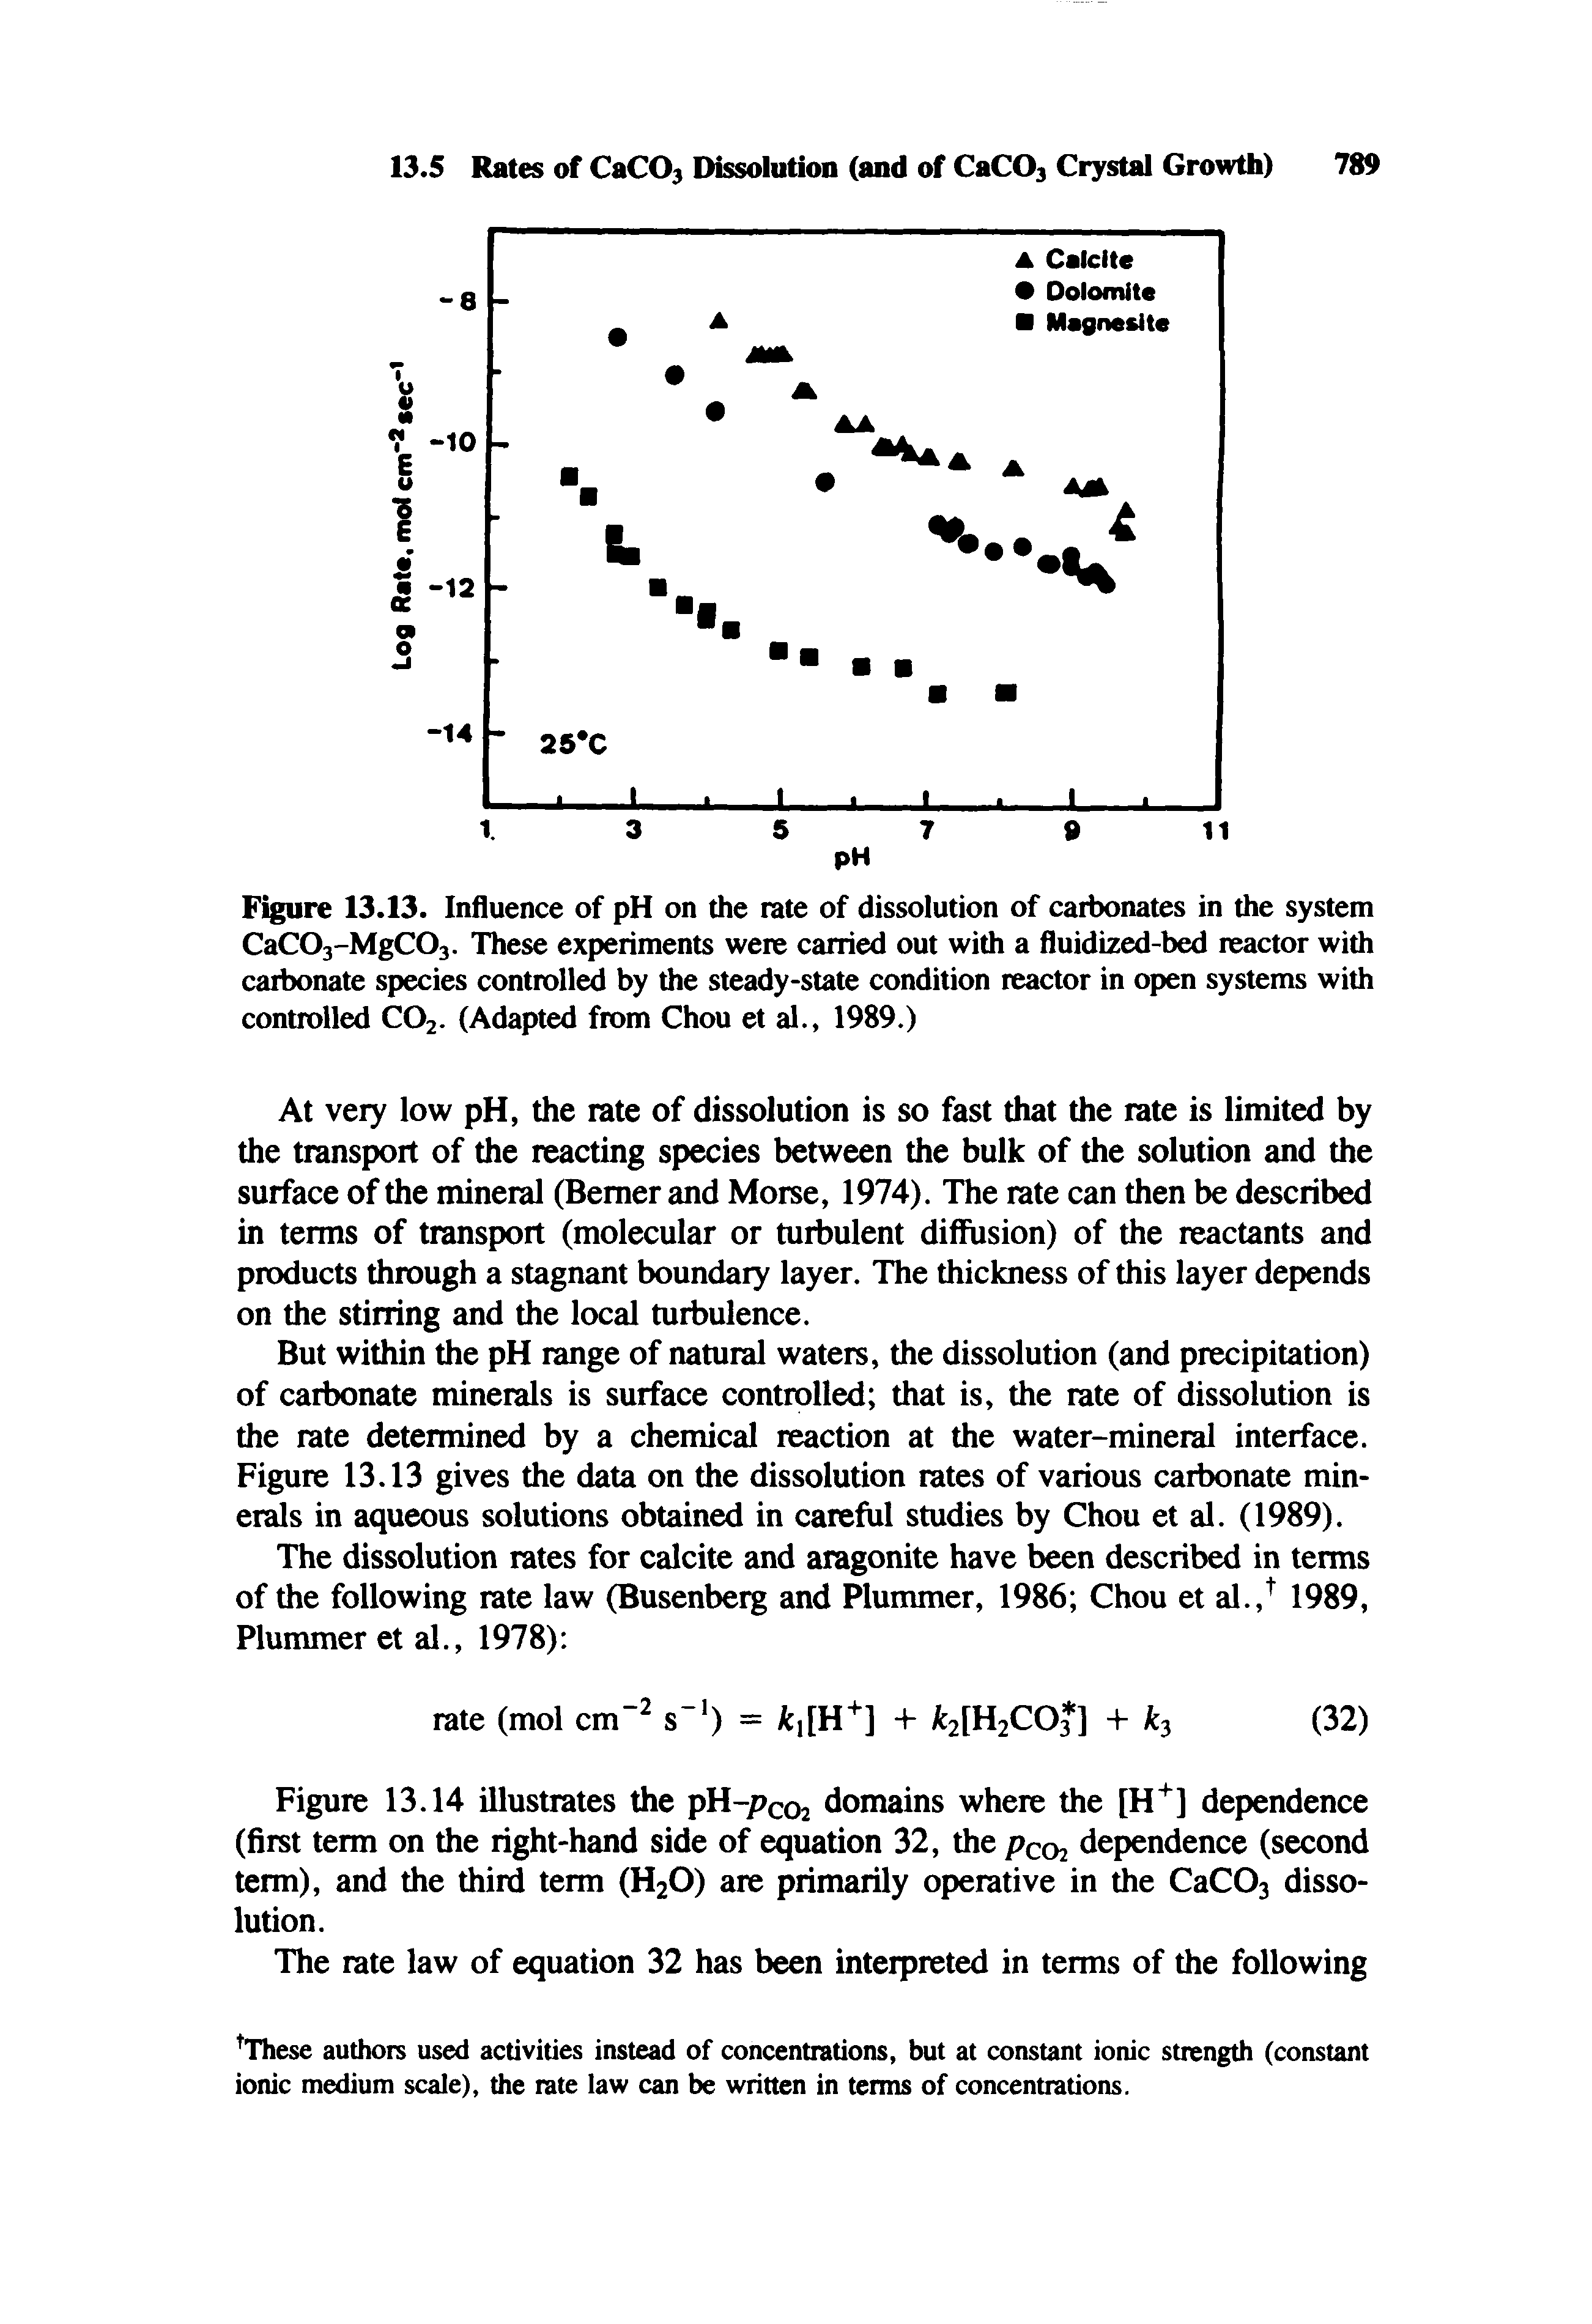 Figure 13.13. Influence of pH on the rate of dissolution of carbonates in the system CaC03-MgC03. These experiments were carried out with a fluidized-bed reactor with carbonate species controlled by the steady-state condition reactor in open systems with controlled CO2. (Adapted from Chou et al., 1989.)...